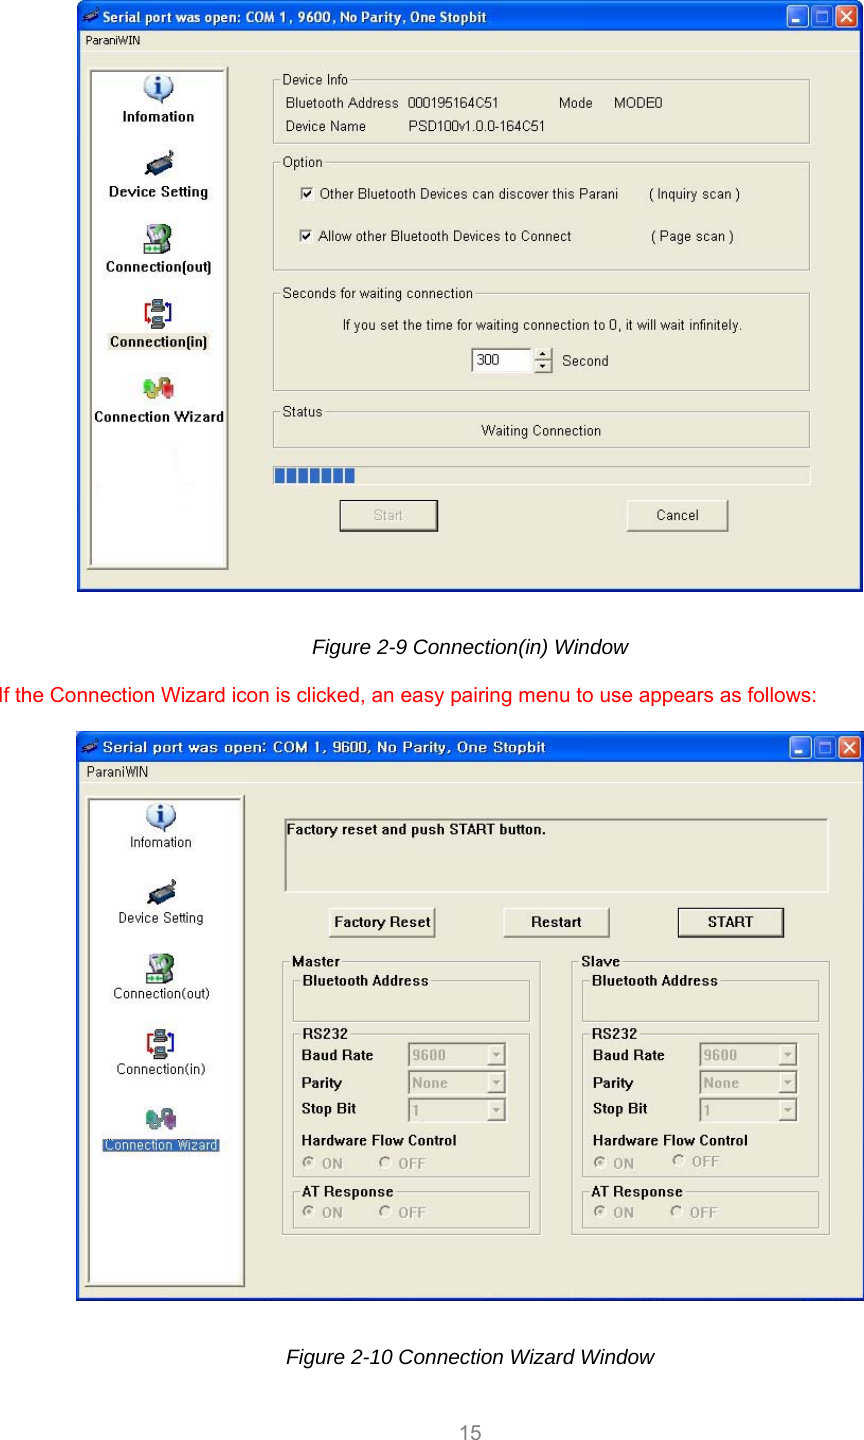  15   Figure 2-9 Connection(in) Window  If the Connection Wizard icon is clicked, an easy pairing menu to use appears as follows:    Figure 2-10 Connection Wizard Window 